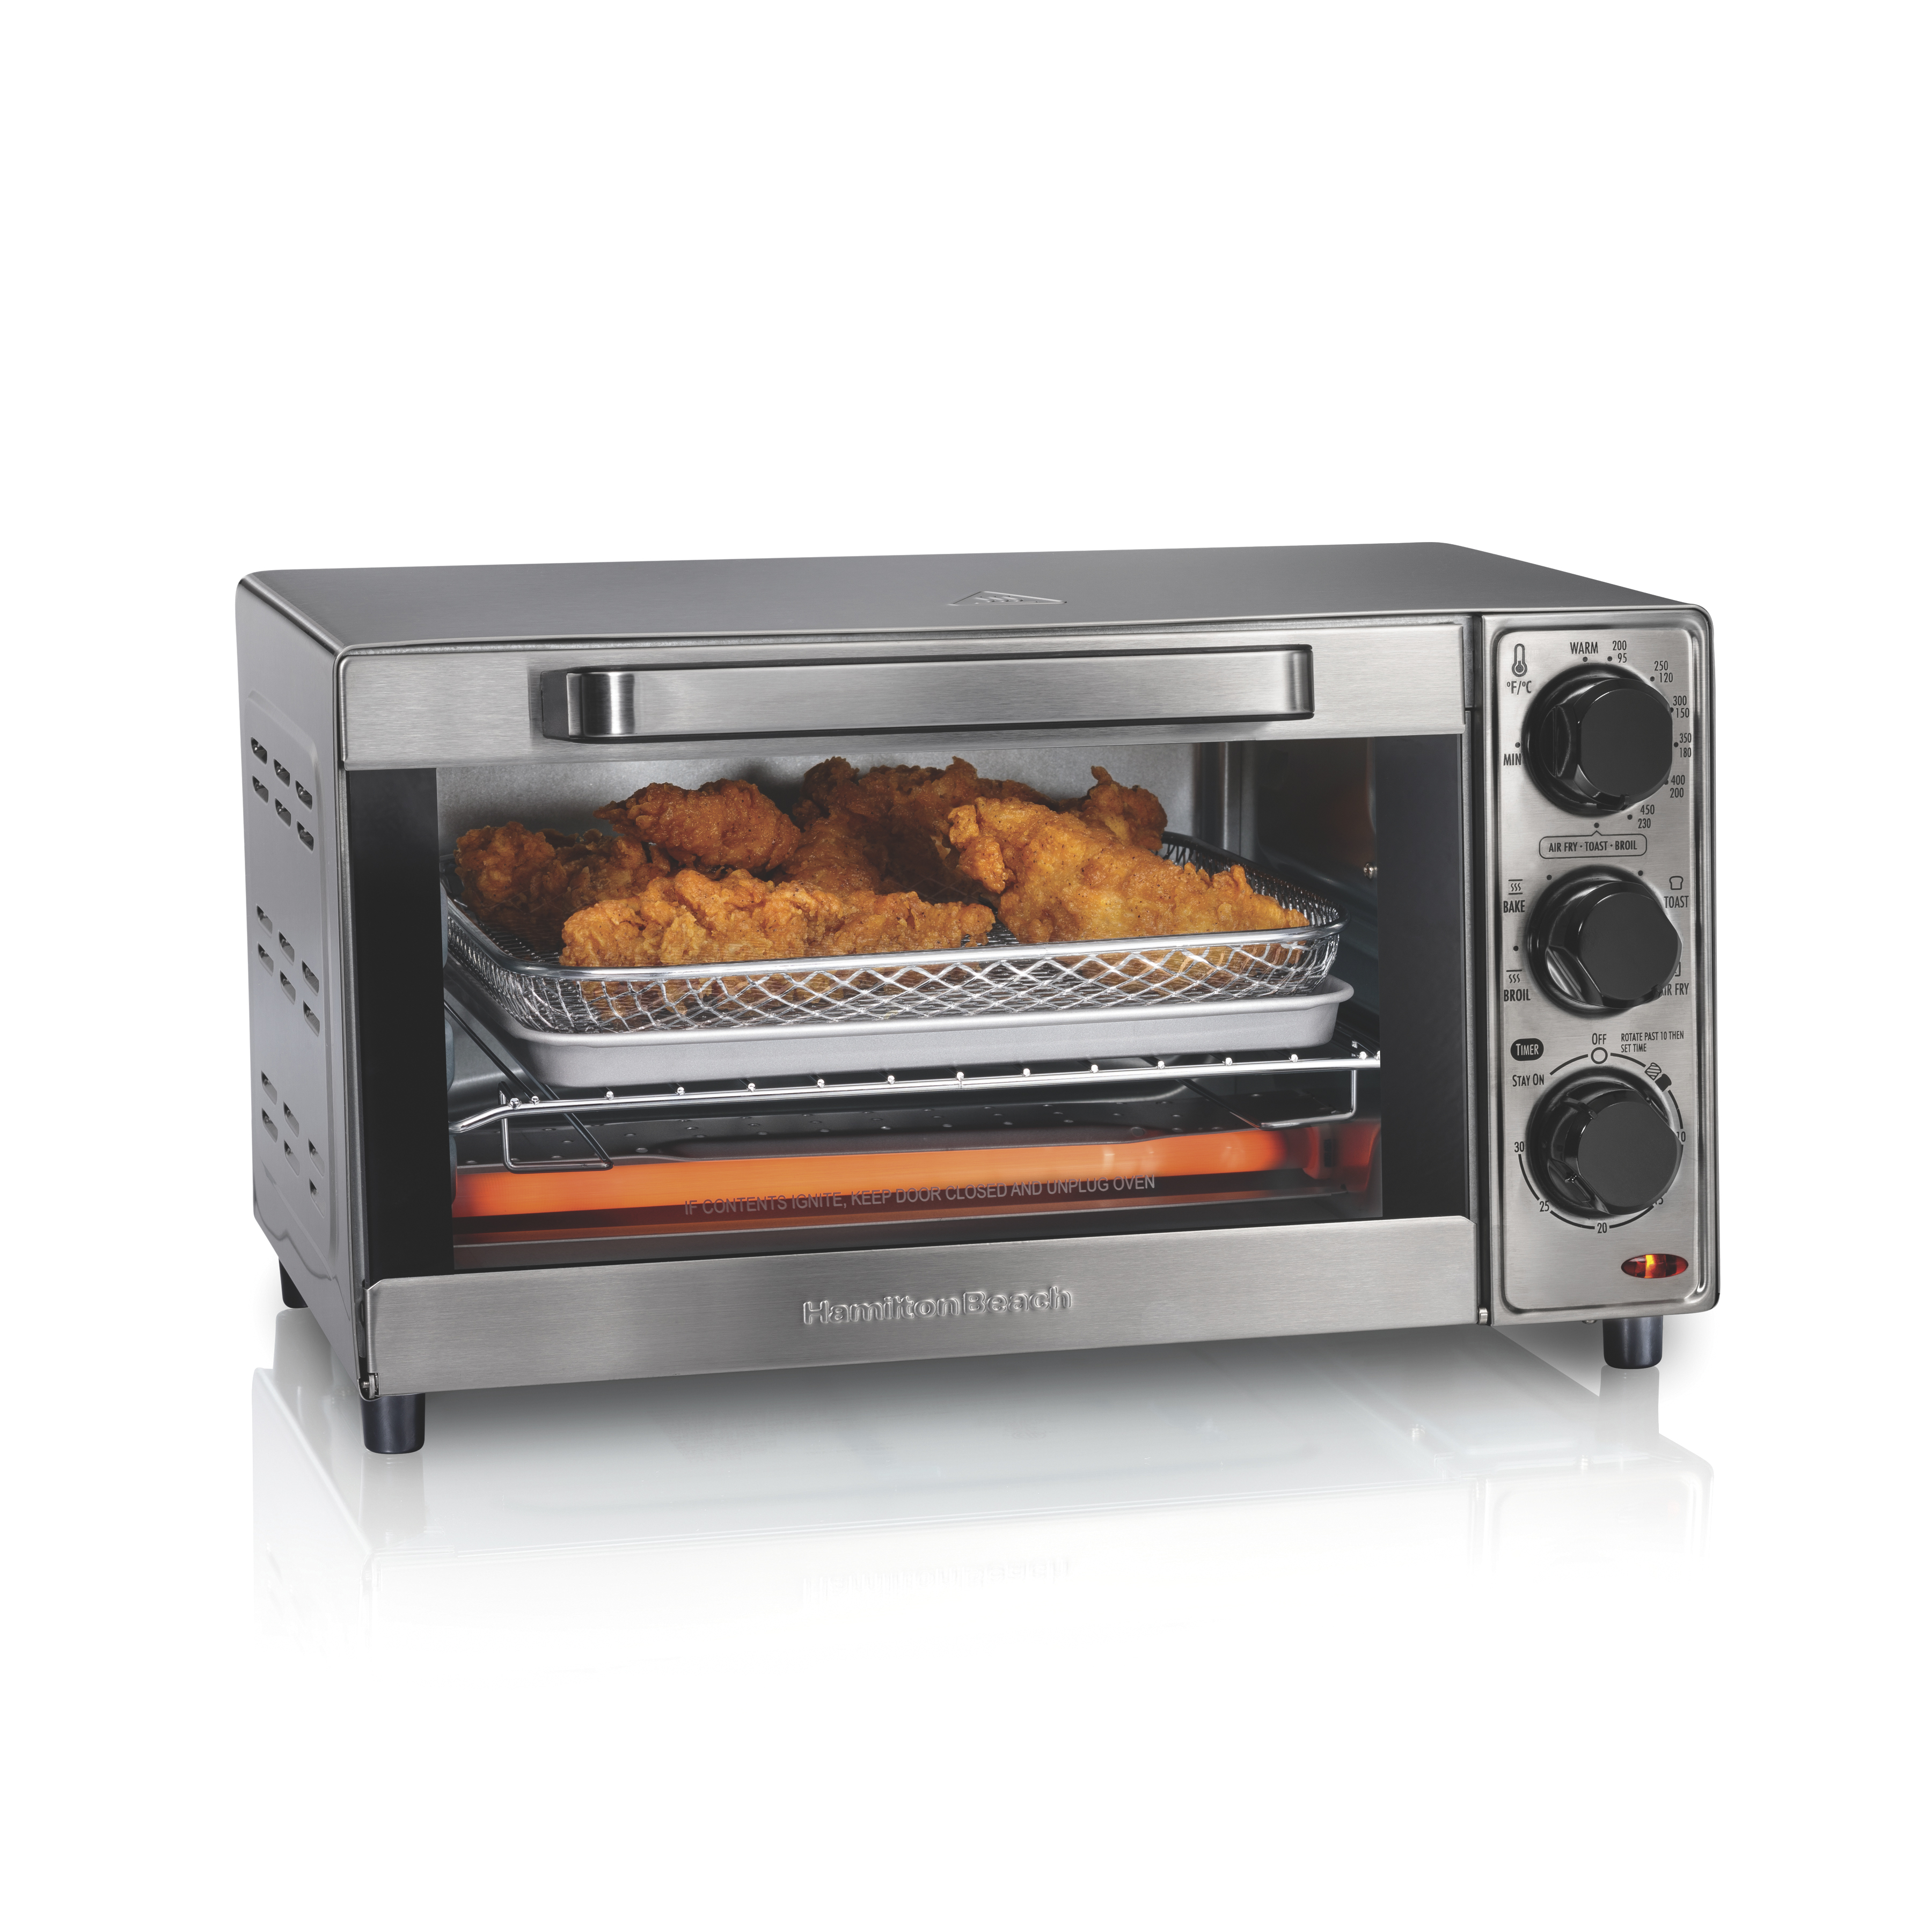 Hamilton Beach Sure-Crisp Air Fryer Toaster Oven, 4 Slice Capacity, Stainless Steel Exterior, 31403 - image 1 of 3